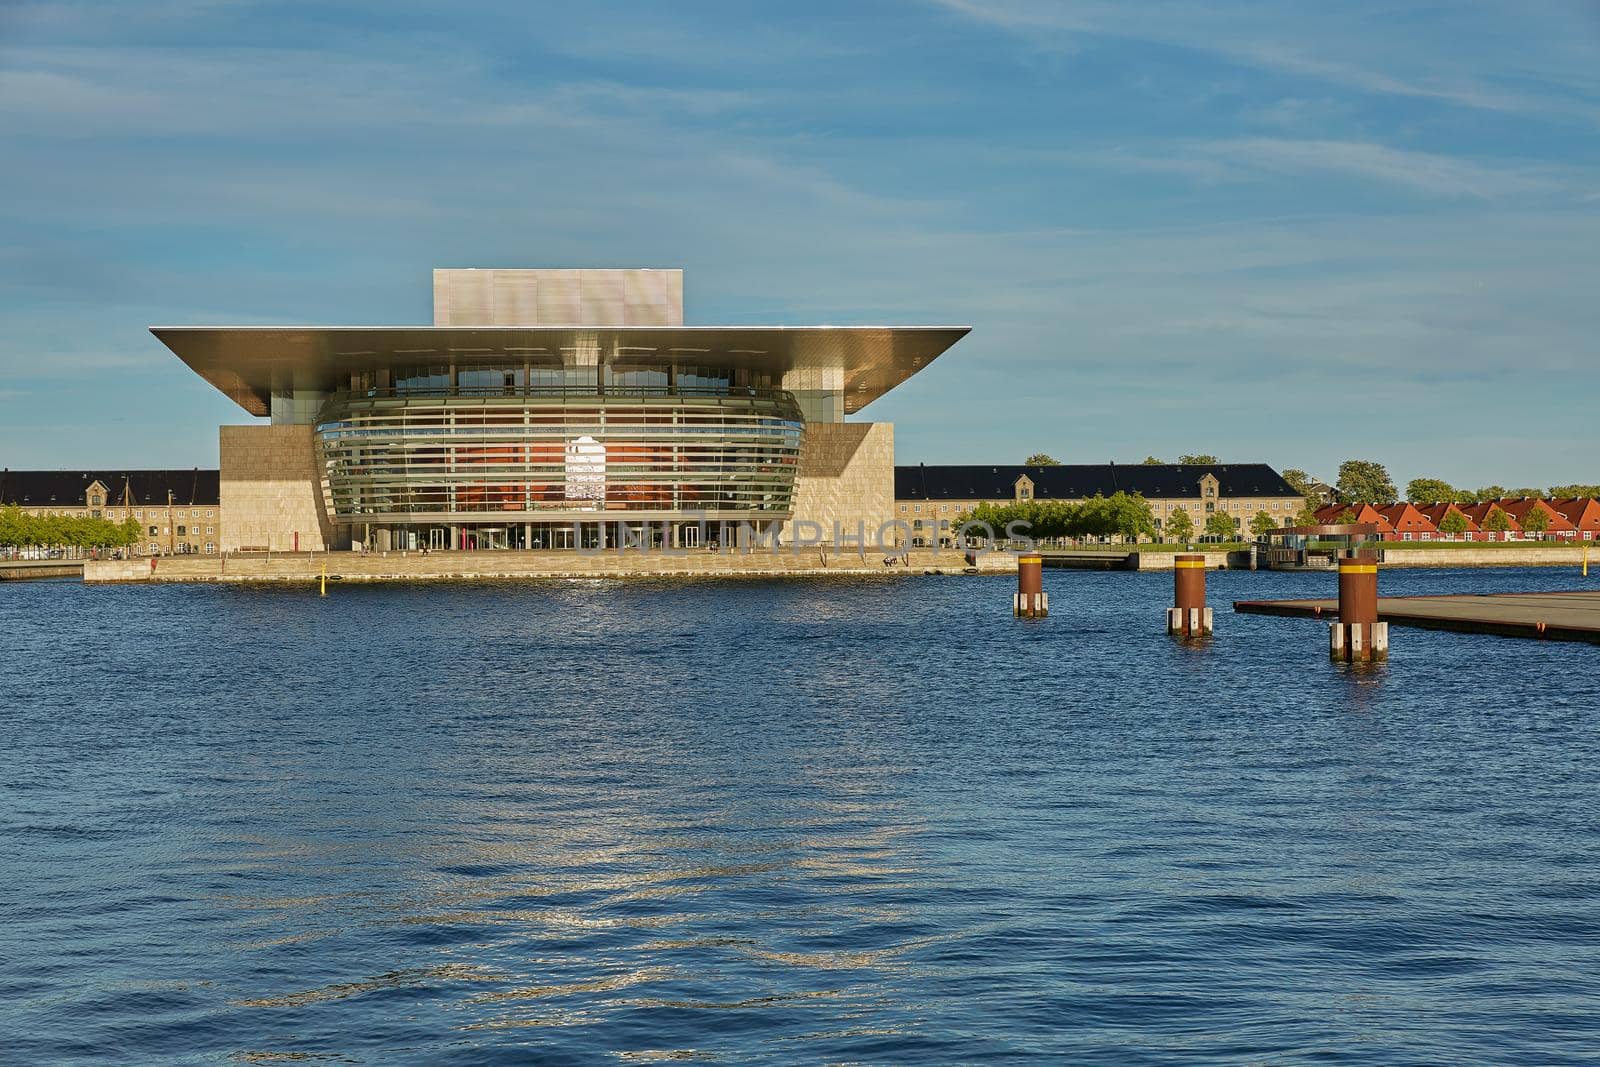 The National Opera House "Operaen" located on the island of Holmen in central Copenhagen. One of the most expensive opera houses ever built by wondry